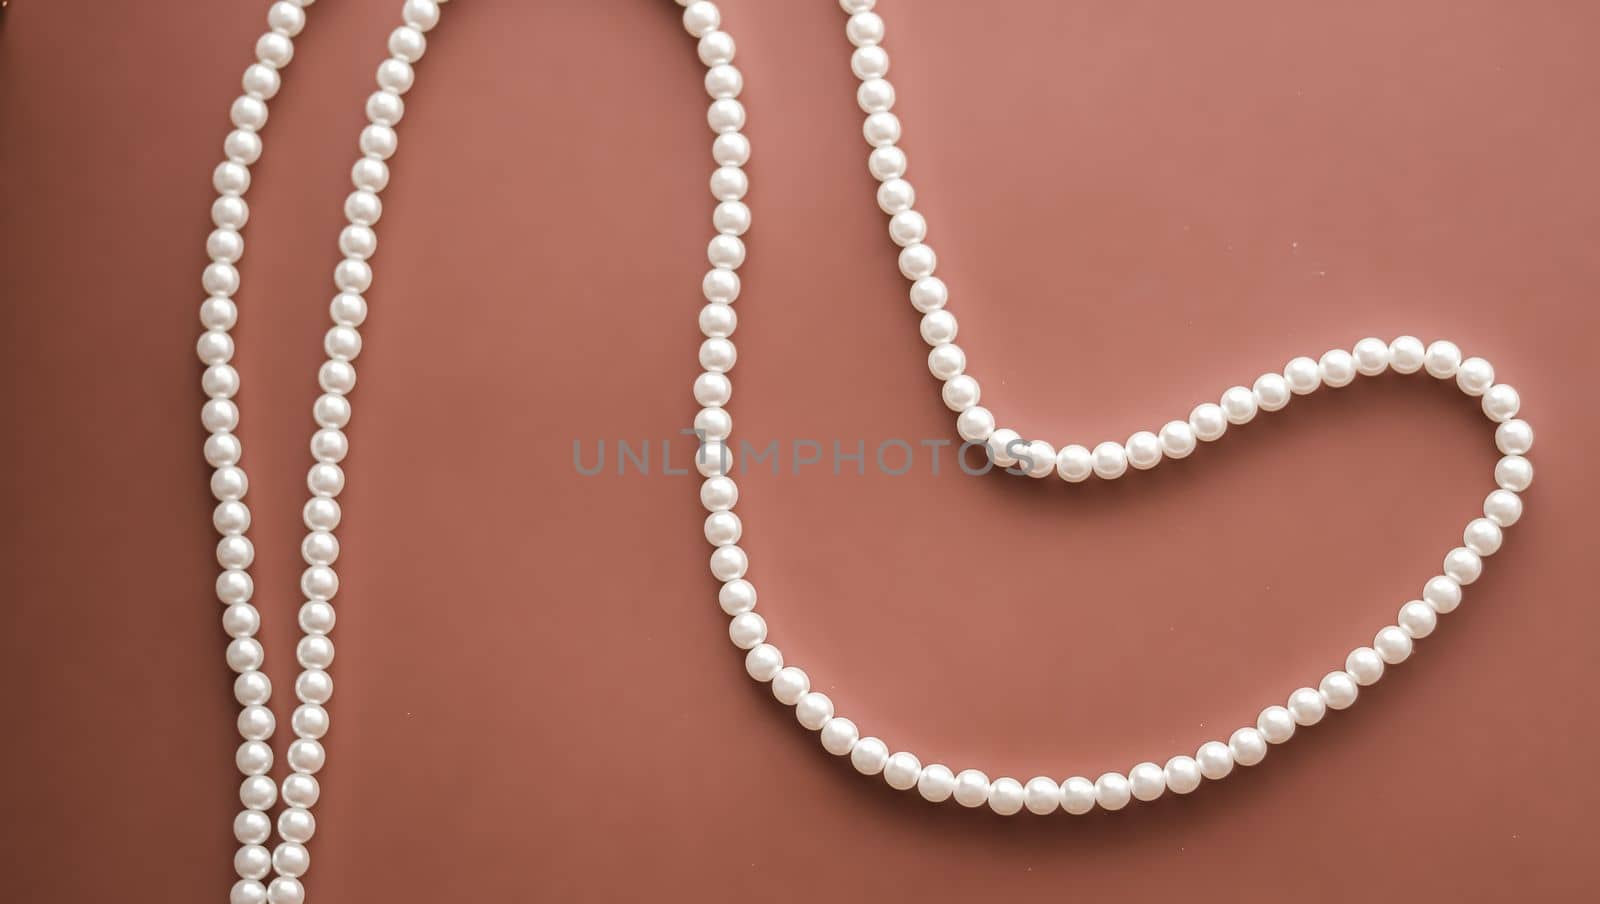 Pearl jewellery necklace on brown background by Anneleven